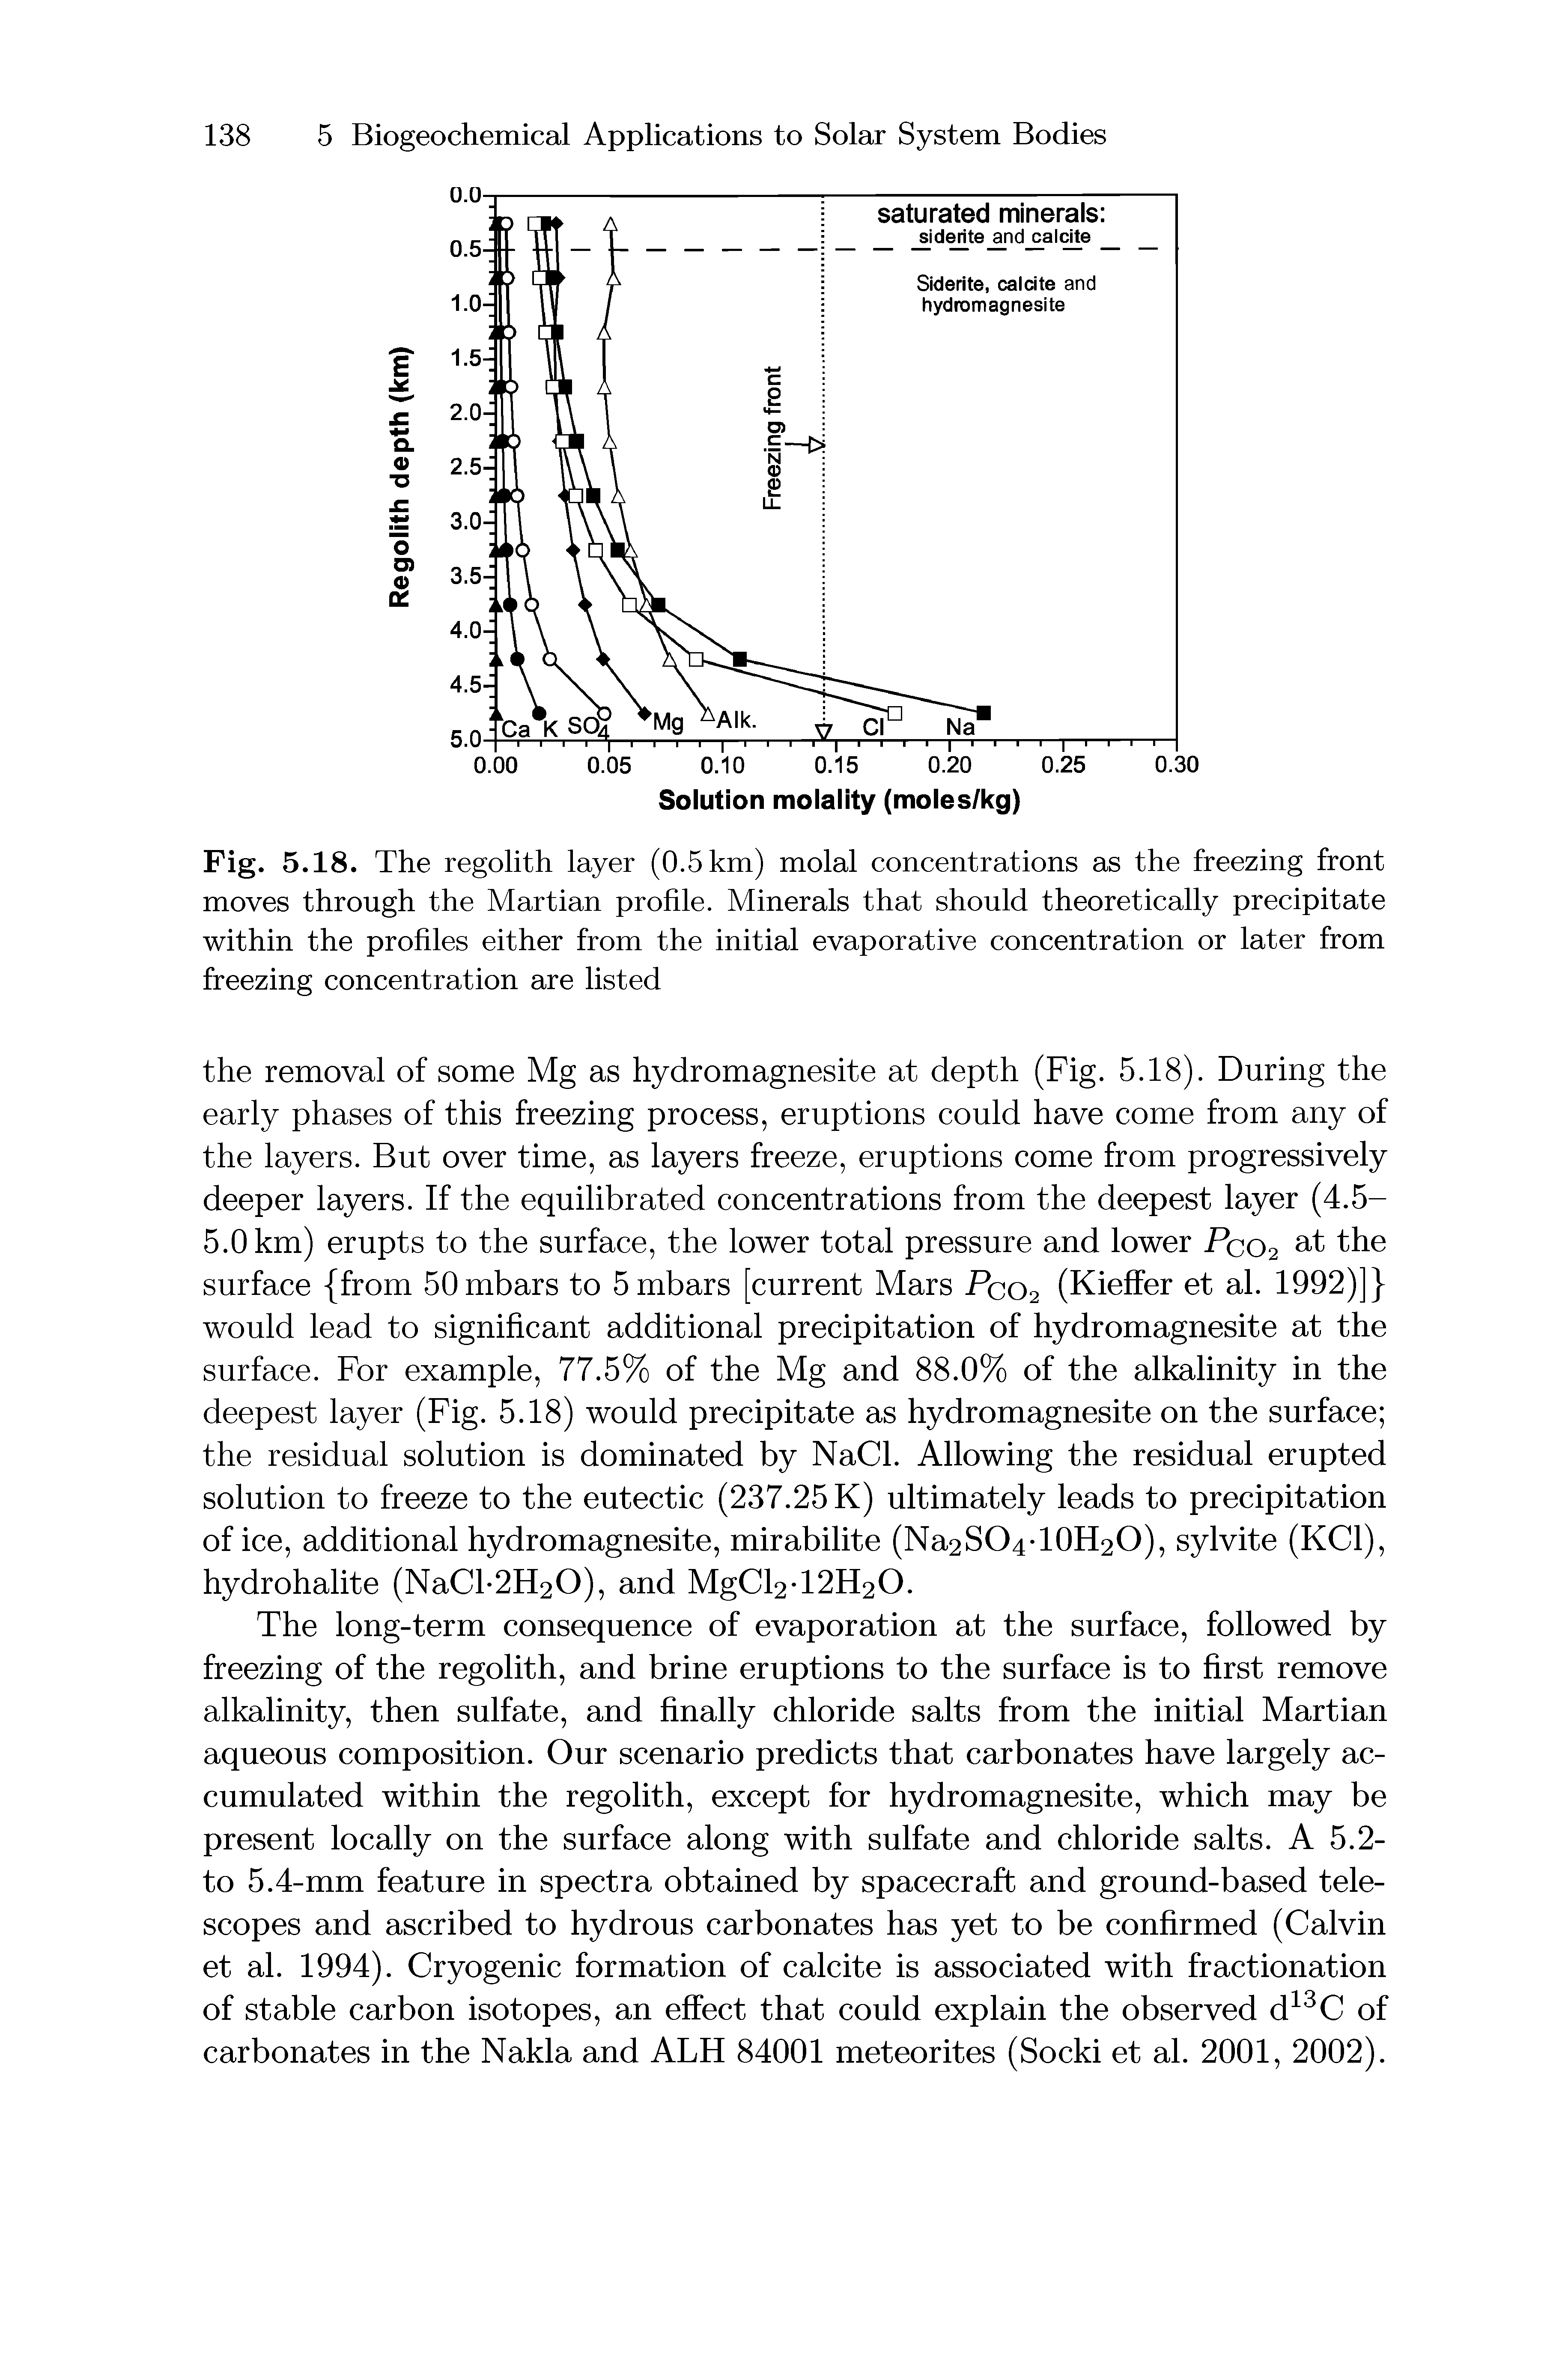 Fig. 5.18. The regolith layer (0.5 km) molal concentrations as the freezing front moves through the Martian profile. Minerals that should theoretically precipitate within the profiles either from the initial evaporative concentration or later from freezing concentration are listed...